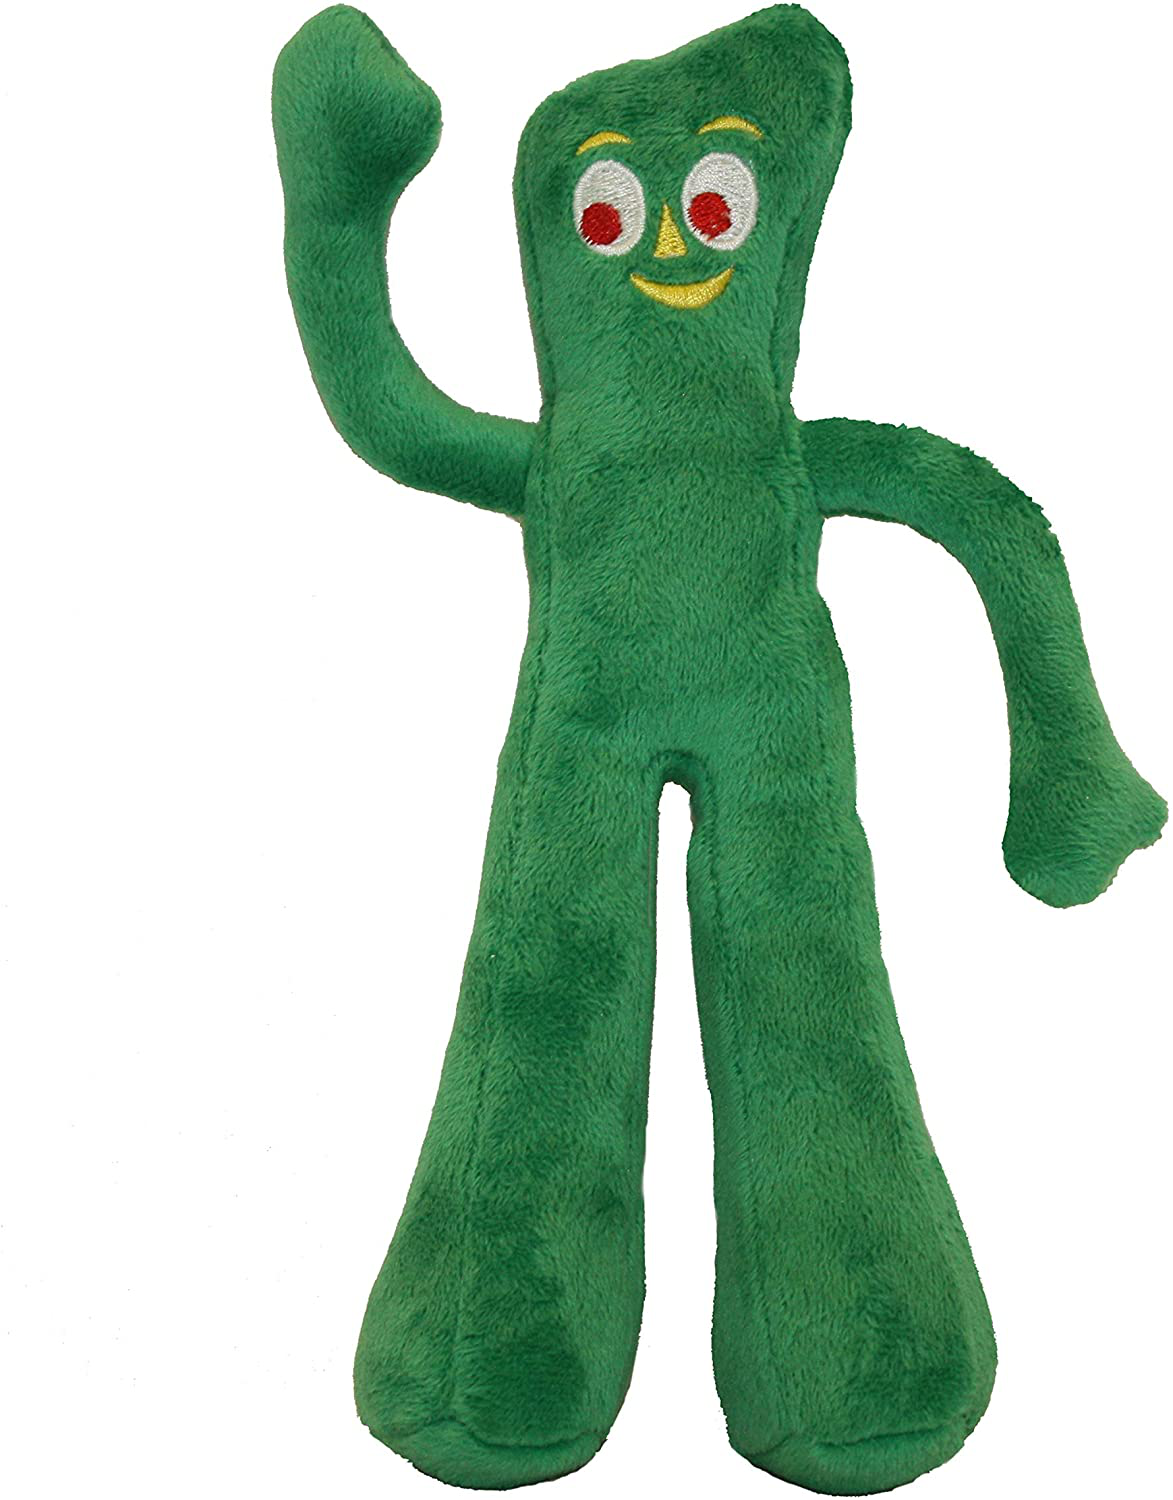 Gumby Plush Filled Dog Toy, 9